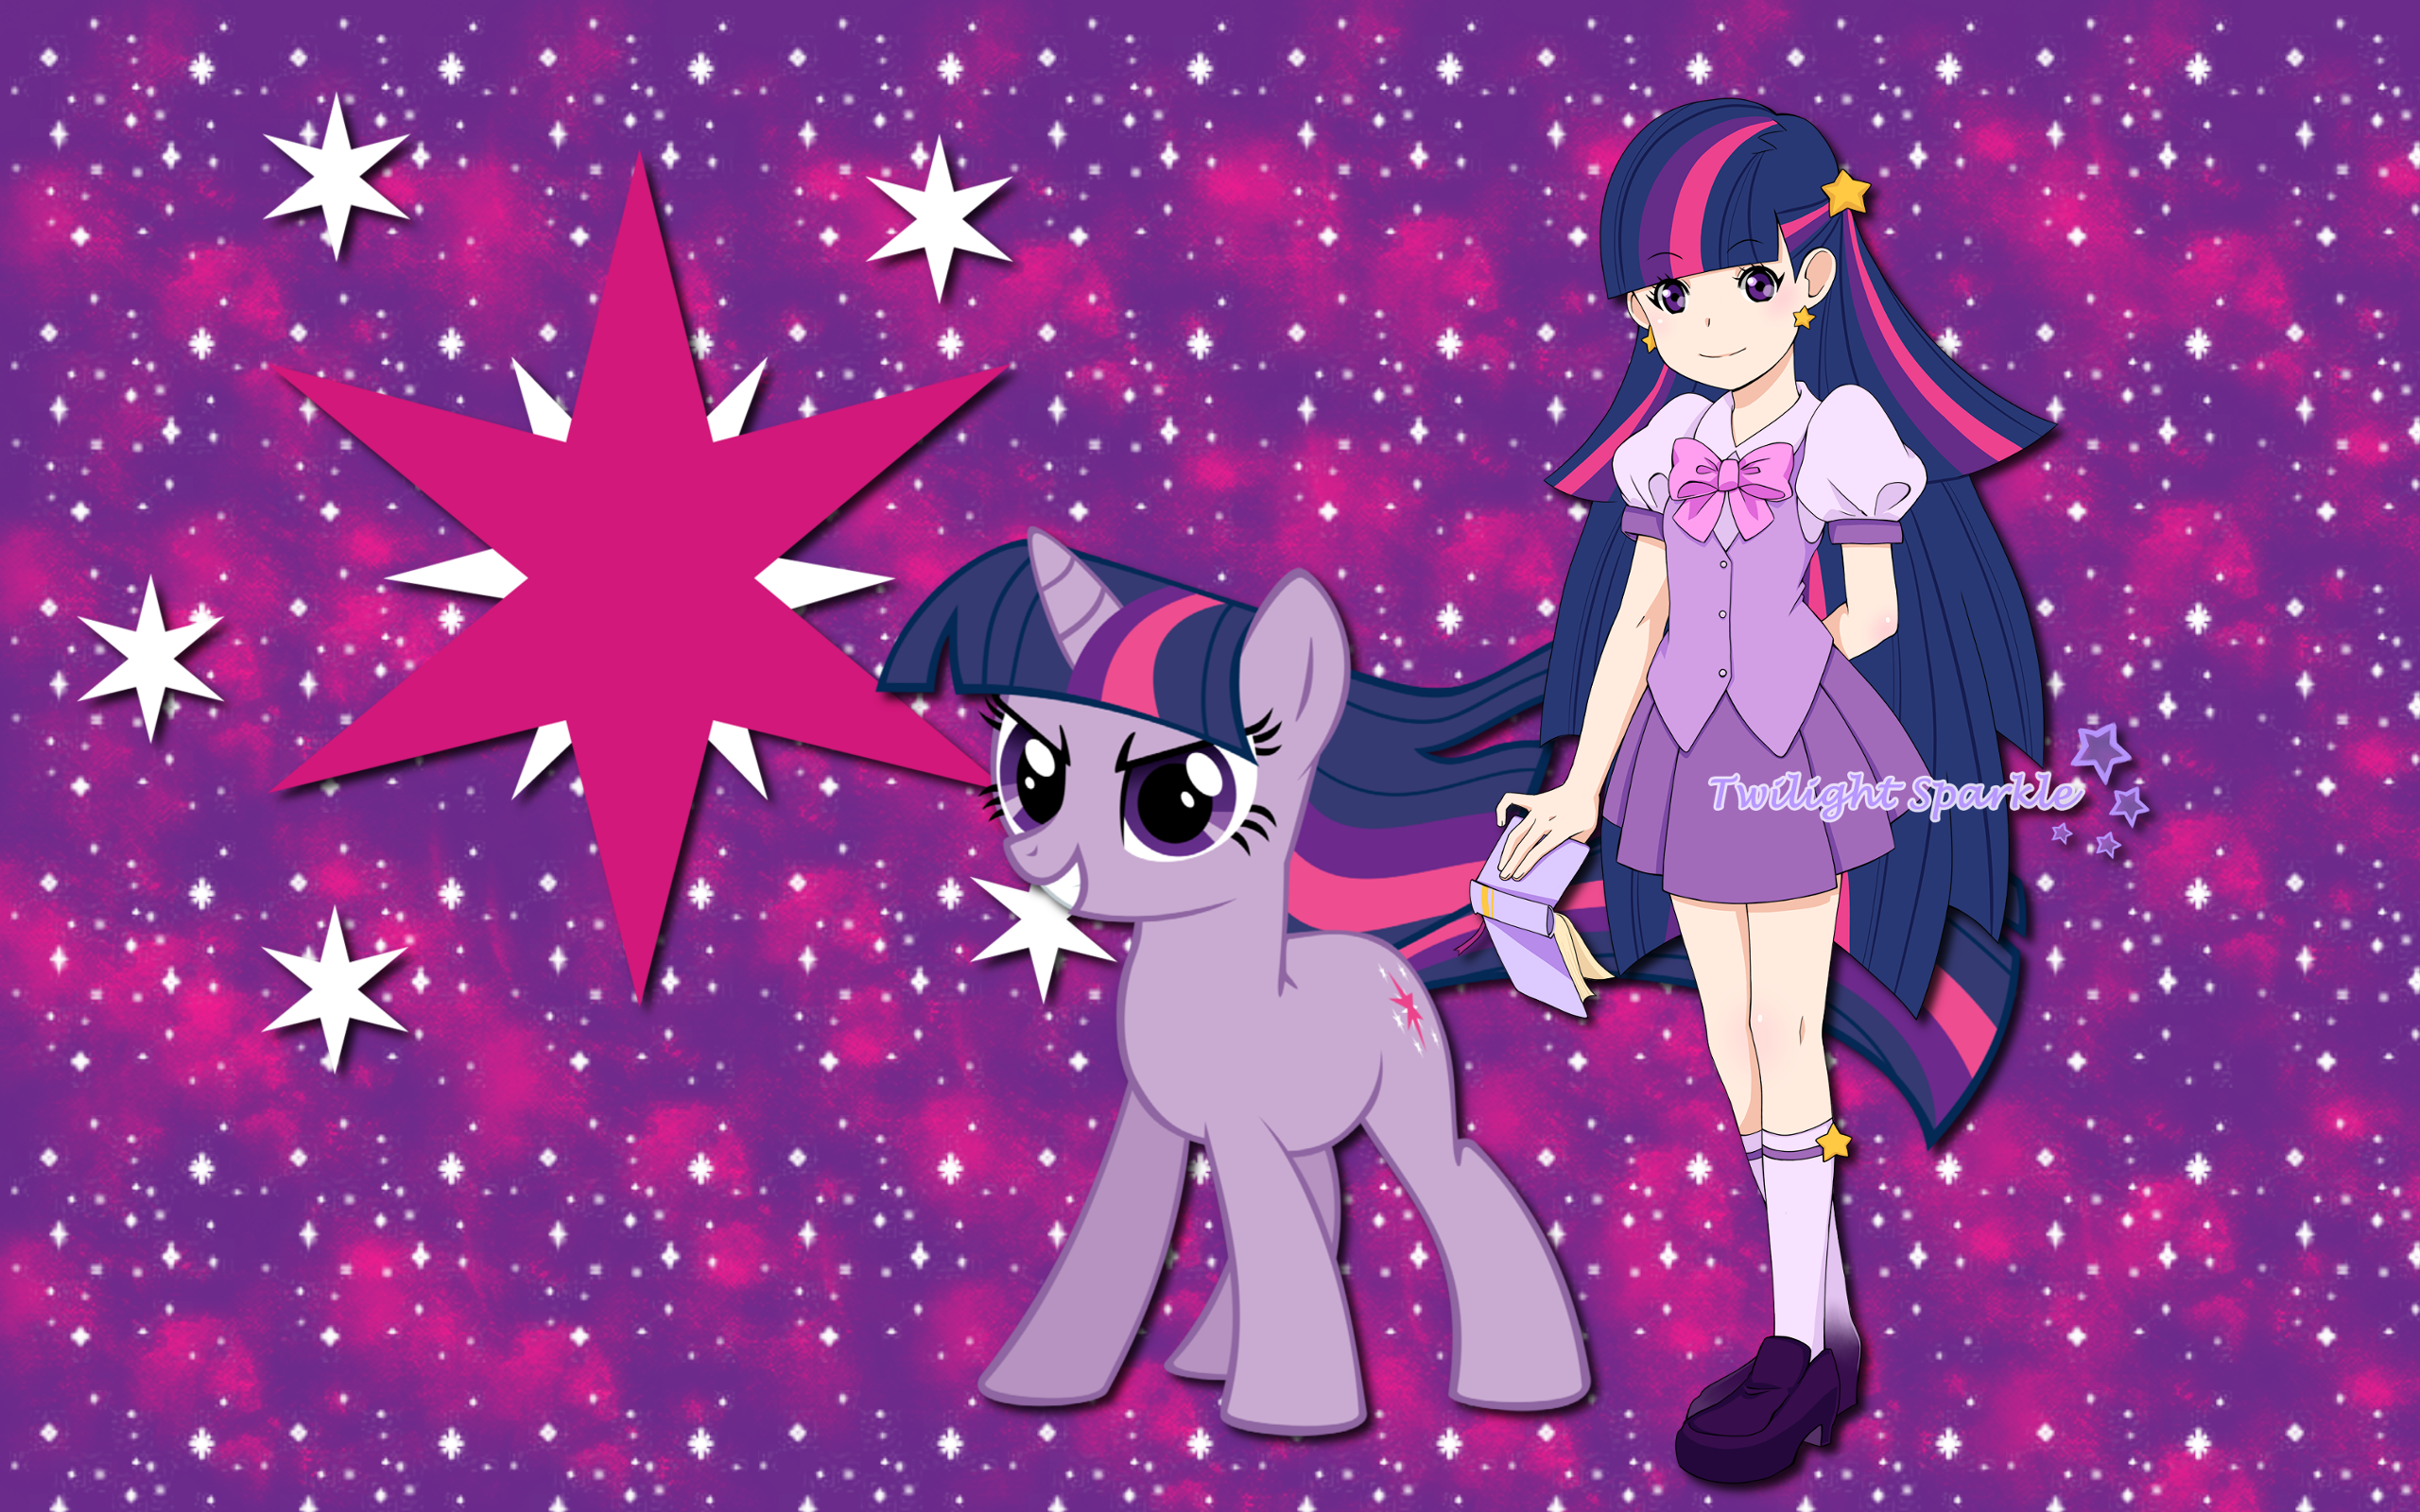 Human Twilight Sparkle WP by AliceHumanSacrifice0, Lilacinum, ooklah and The-Smiling-Pony